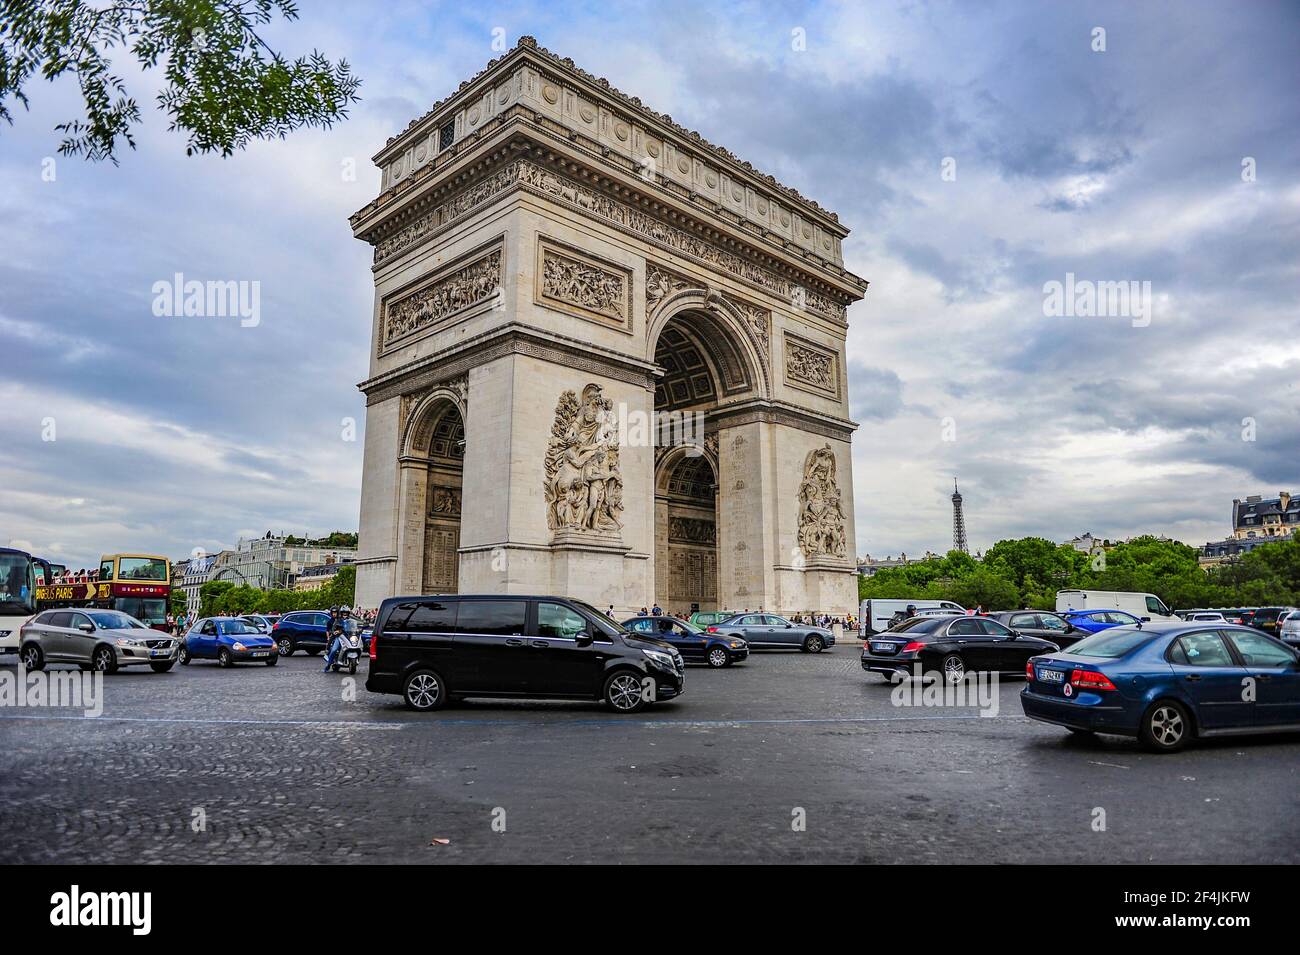 Paris, France - July 18, 2019: Busy traffic around the Triumphal Arch of Paris, France Stock Photo